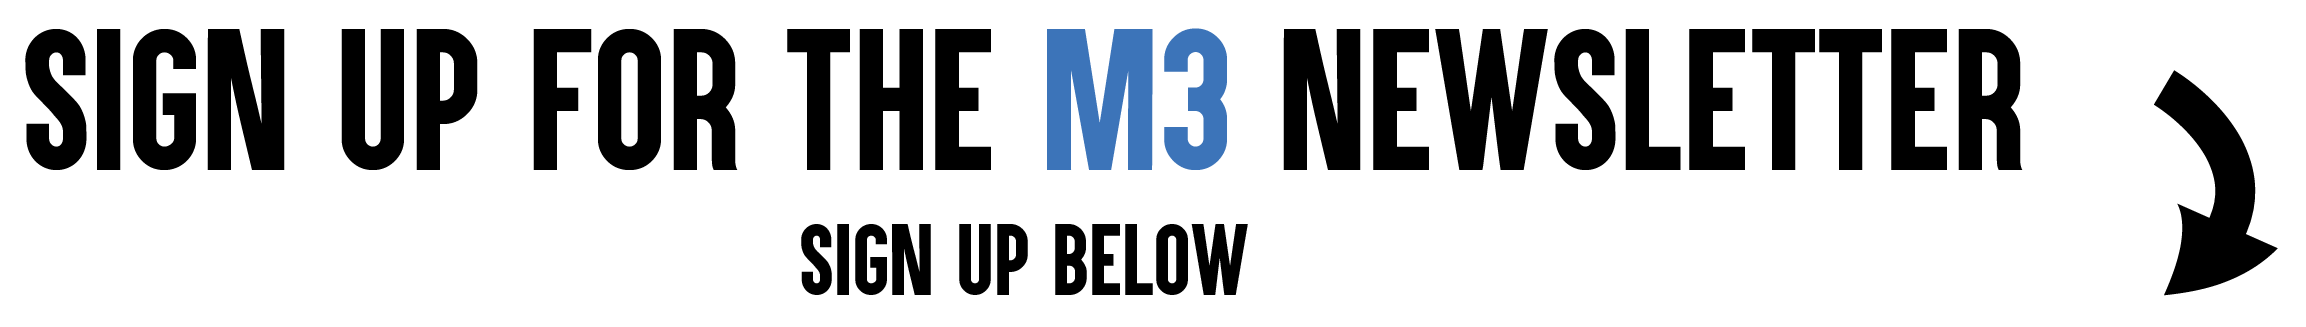 Sign up for the M3 Newsletter below!